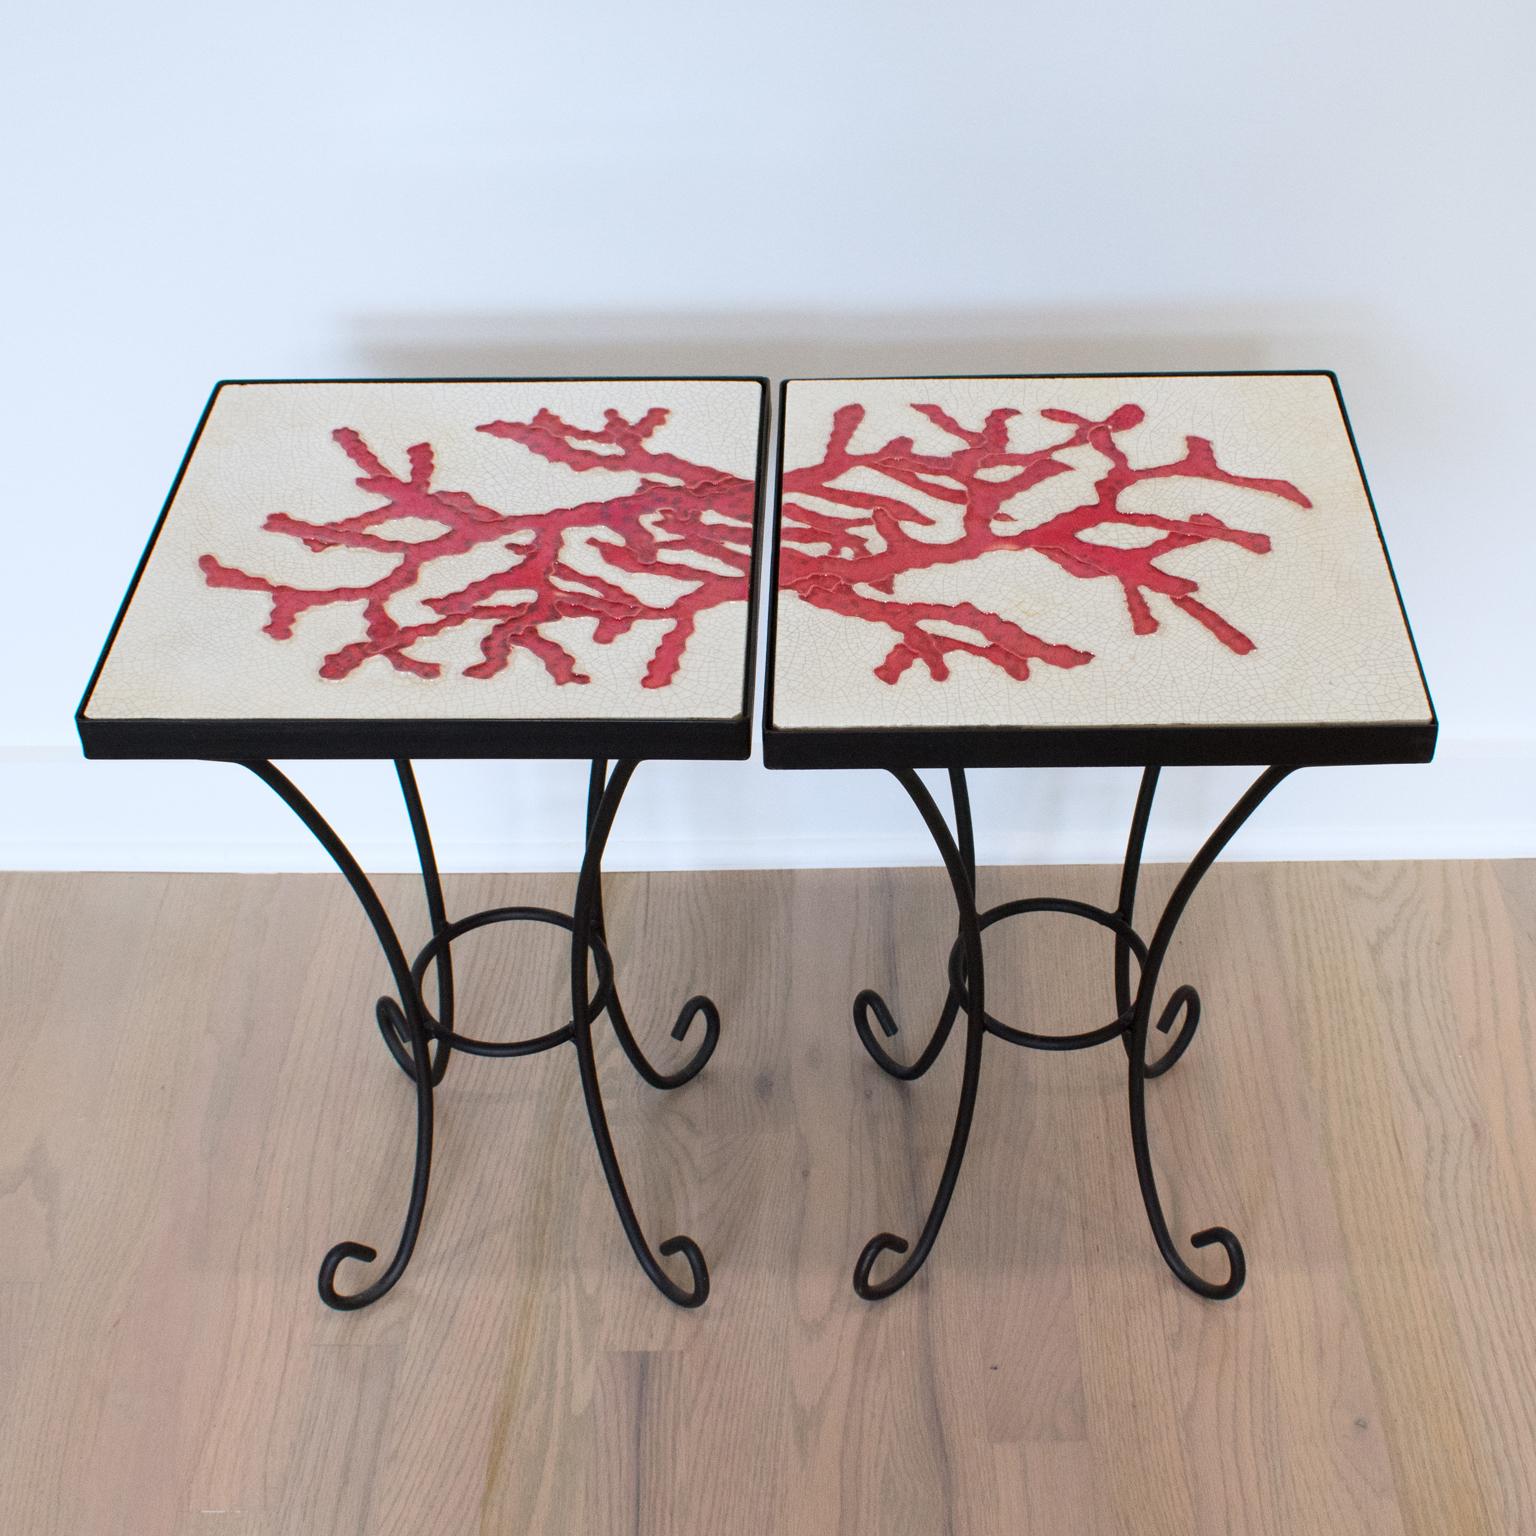 A French ceramist workshop created this elegant pair of coffee or side tables from the 1950s. The structure and legs are solid wrought iron with a matte black finish. The tables have a rounded design, with functional and robust use. The attractive